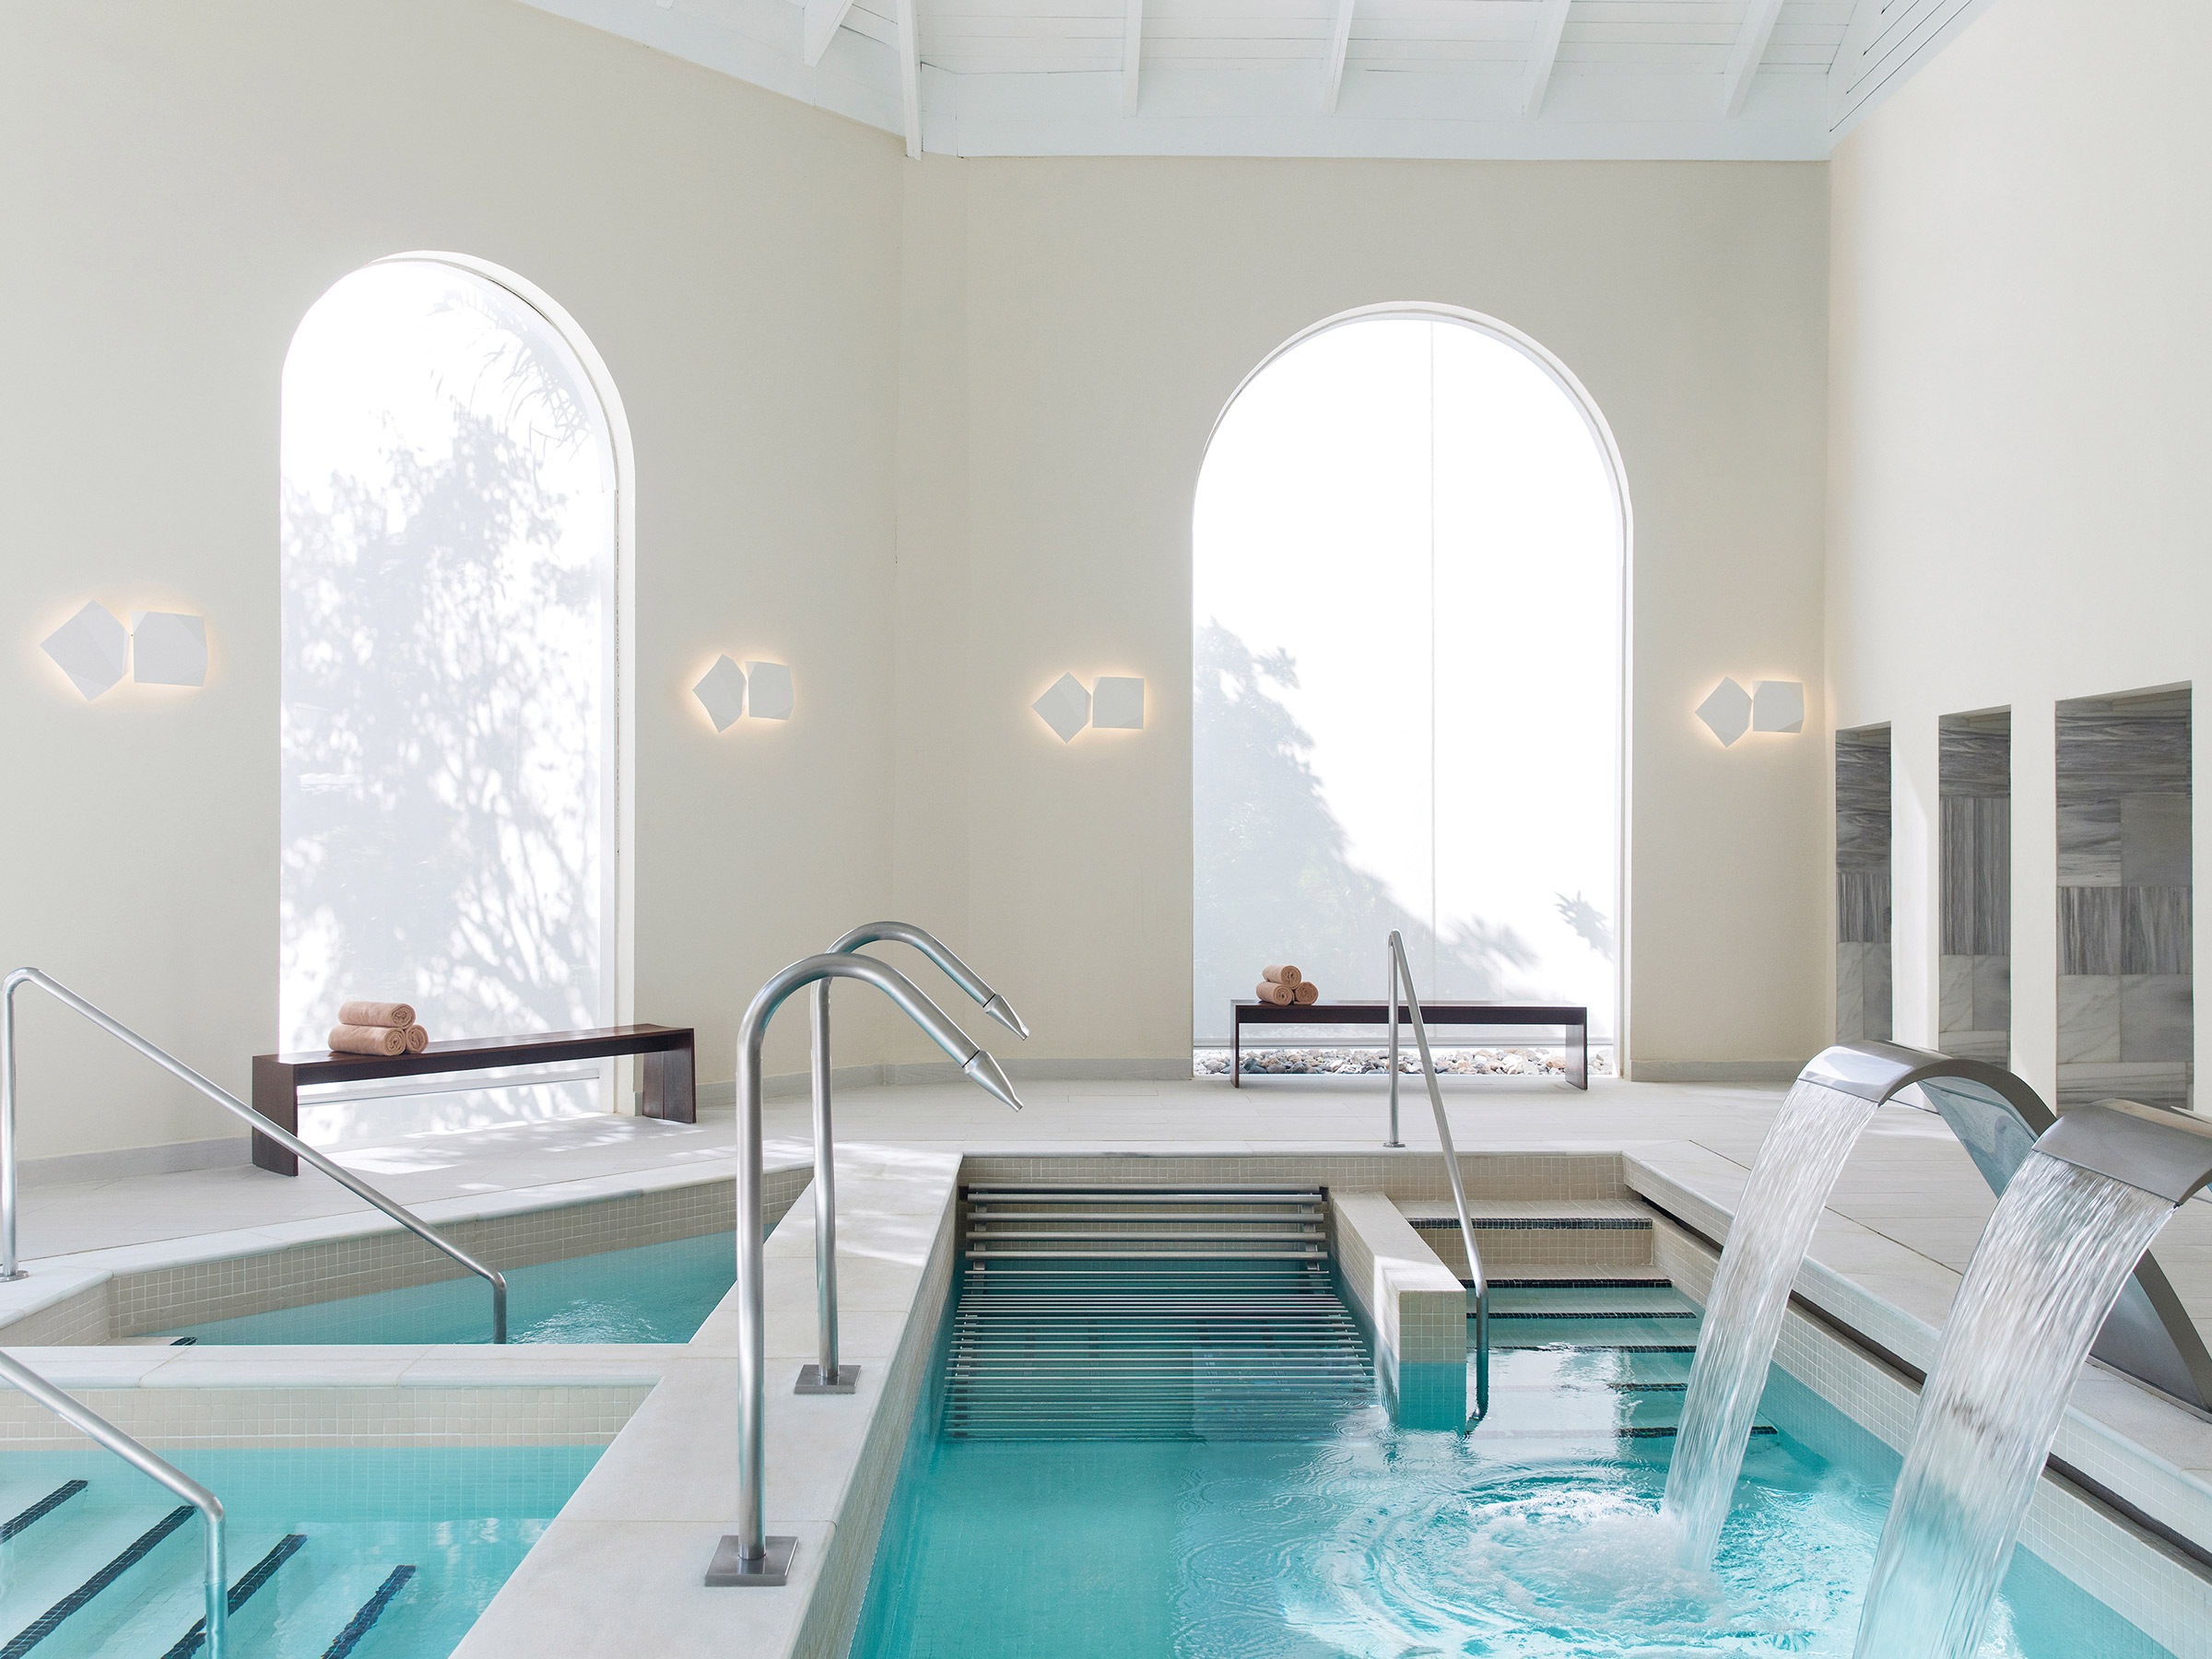 Rekindle and Rewind when Experiencing Our Amazing Hydrotherapy Circuit in Punta Cana